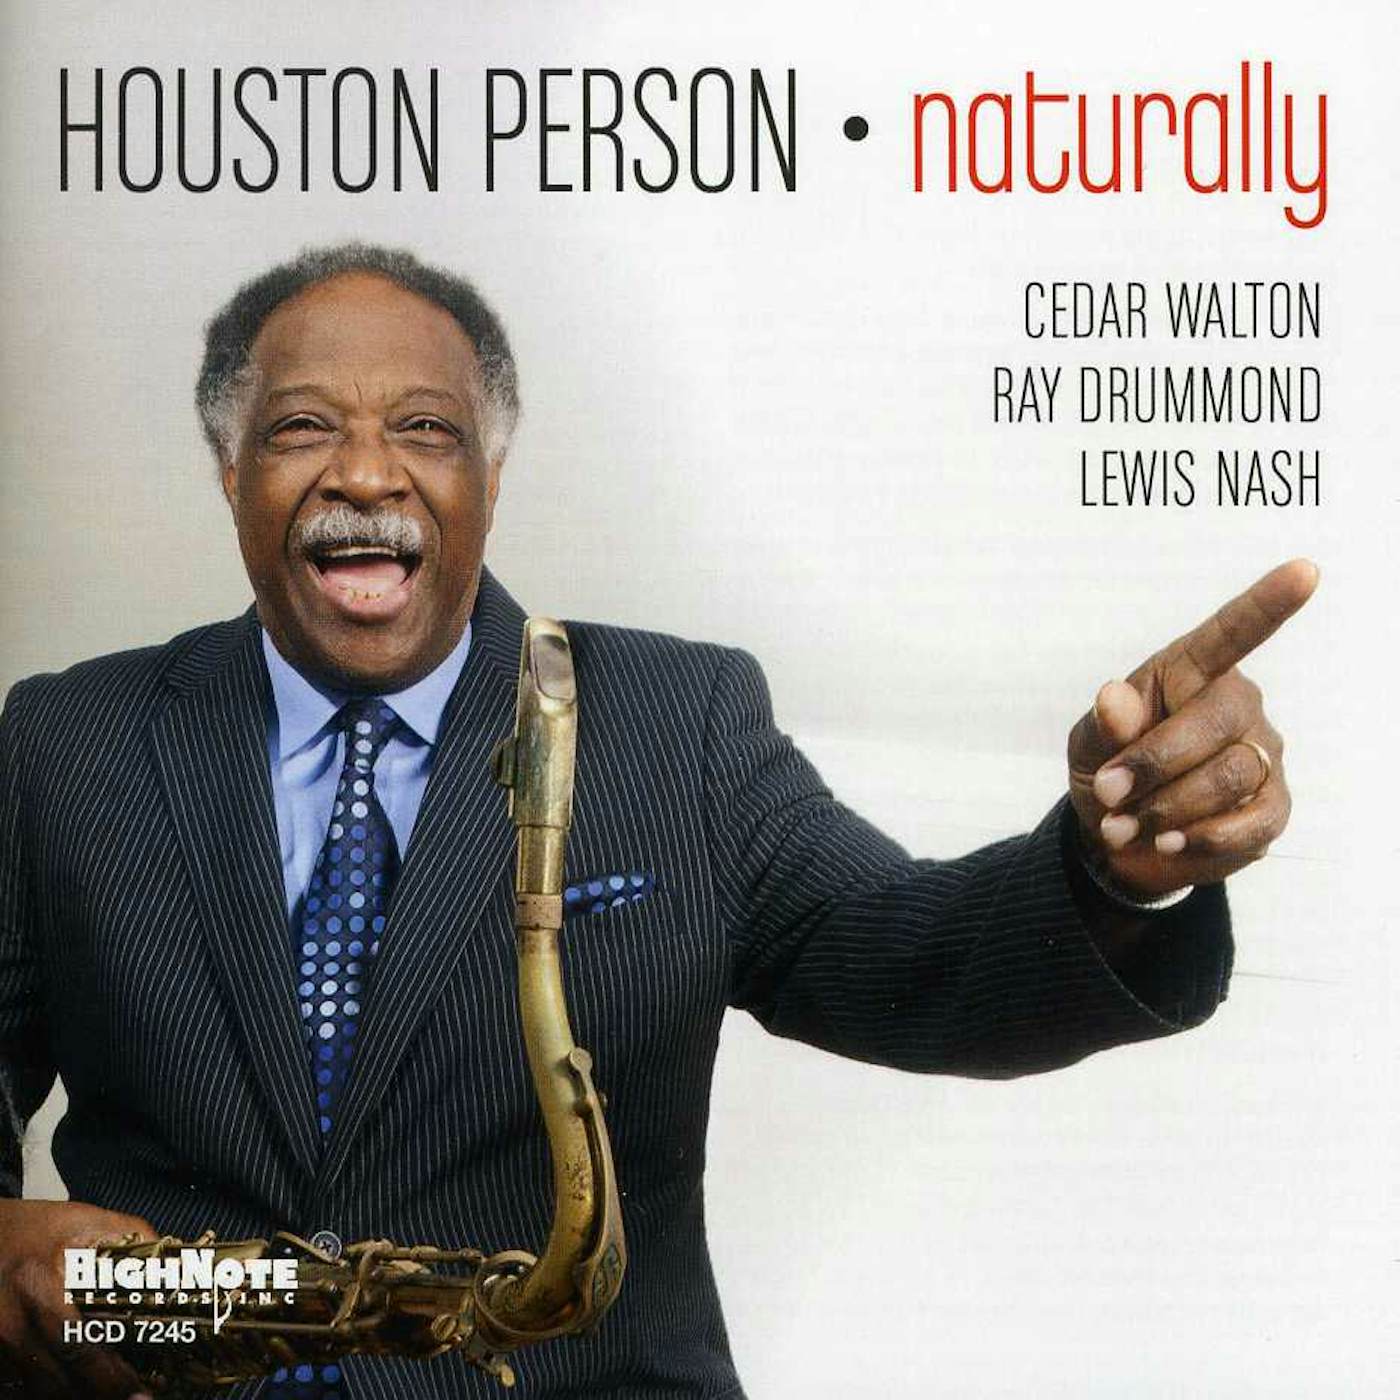 Houston Person NATURALLY CD